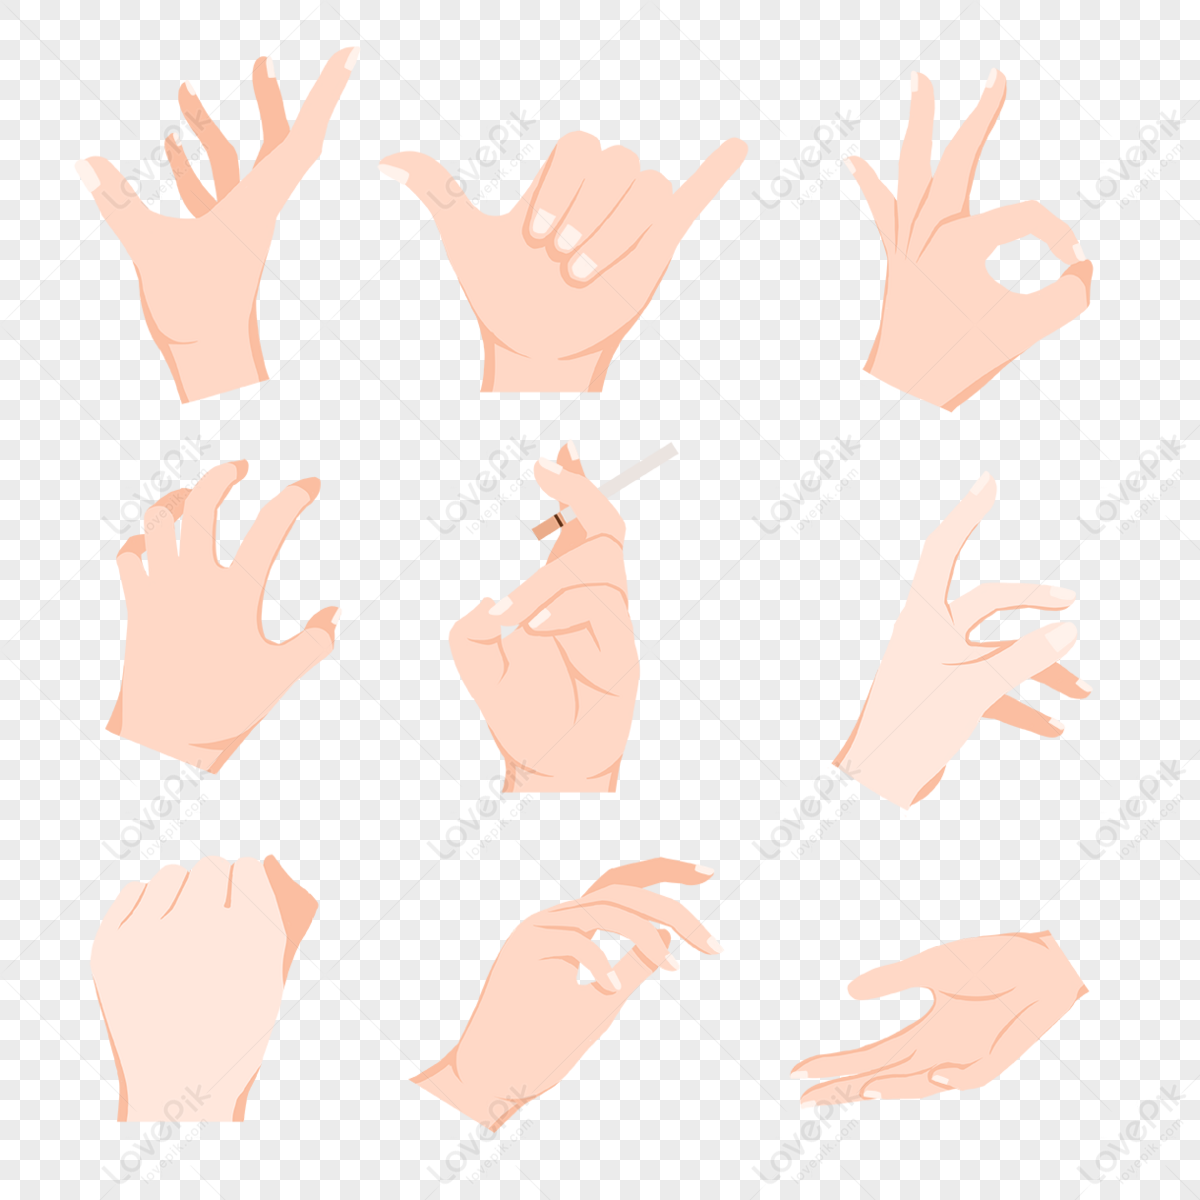 Hands Gestures Isolated White Background Colored Woman's Hand Gesture Set  Stock Vector by ©veta0003.mail.ru 442279566